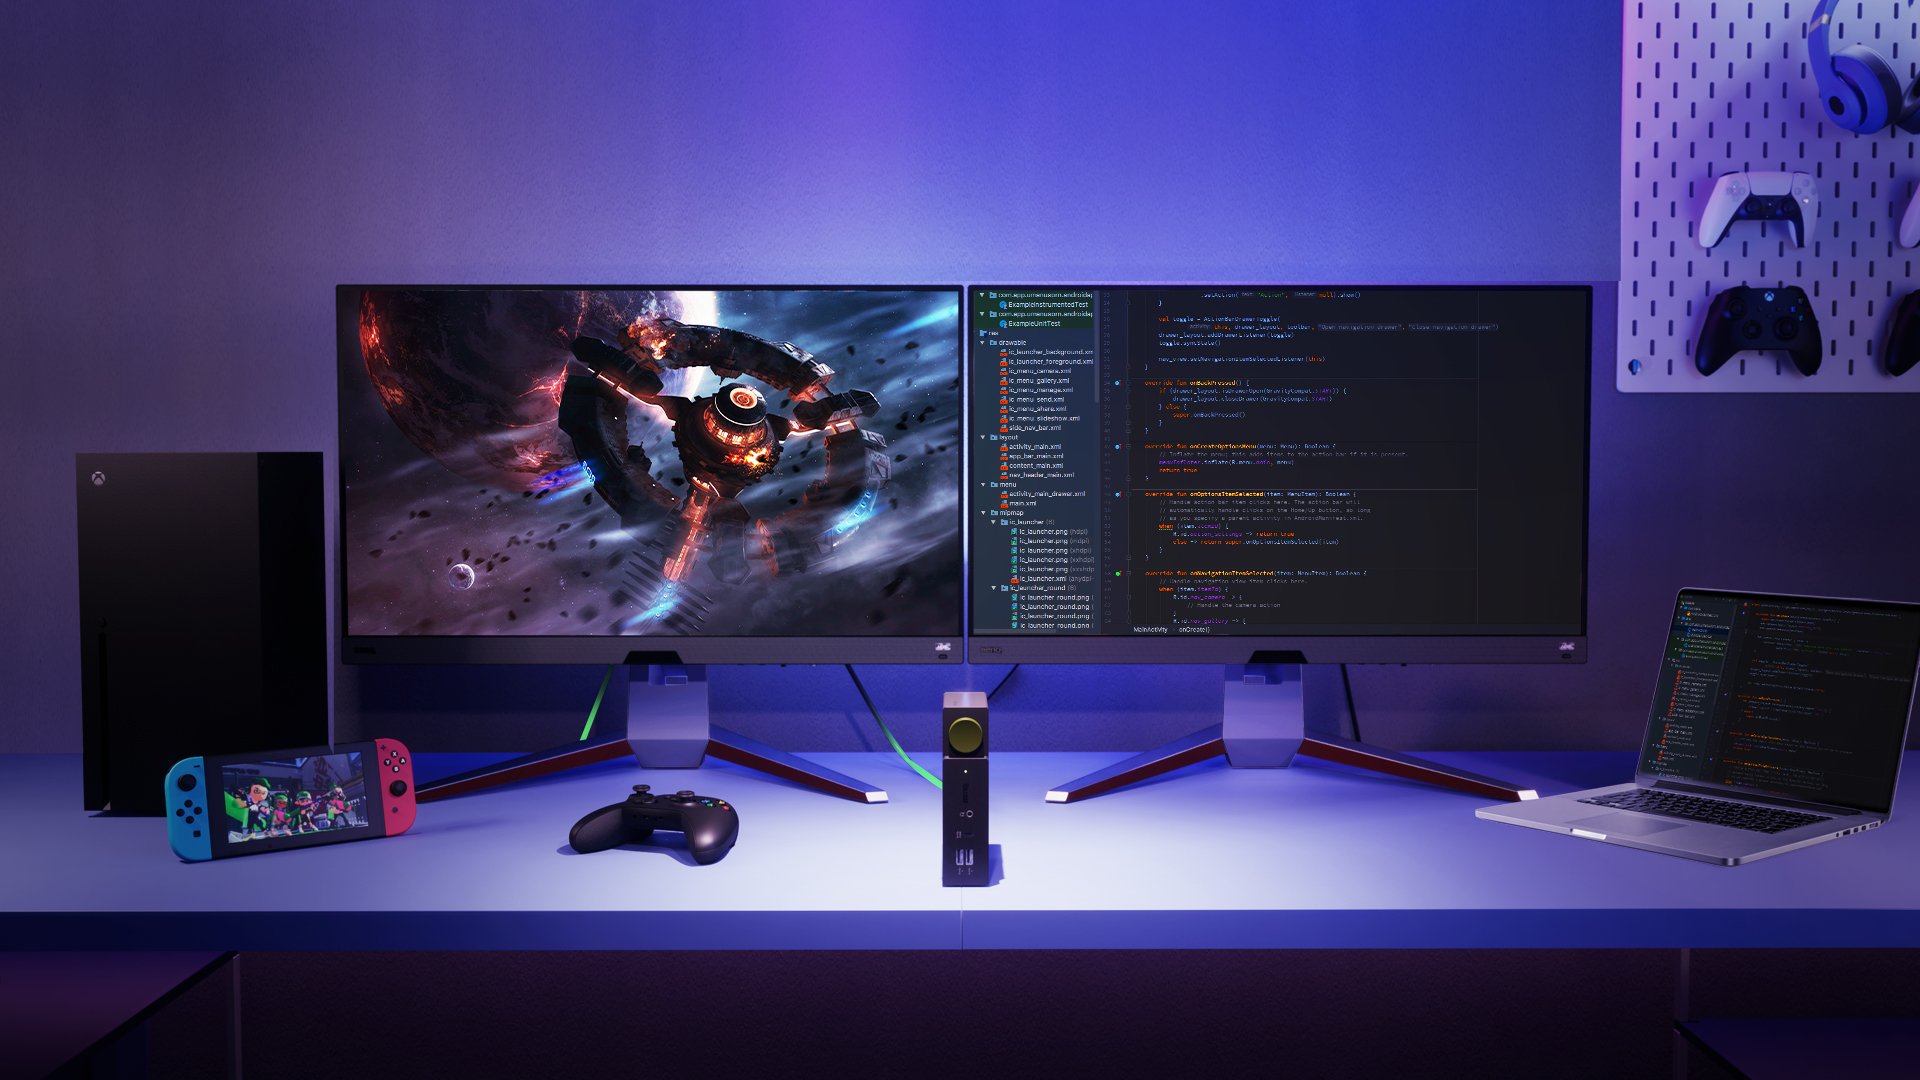 benq dock dp1310 becreatus features dolby atmos hdr and 8K 60hz compatibility connect it with an hdmi 2.1 cable making it suitable for gaming and entertainment with devices like ps5 xbox series x xbox series s and nintendo switch